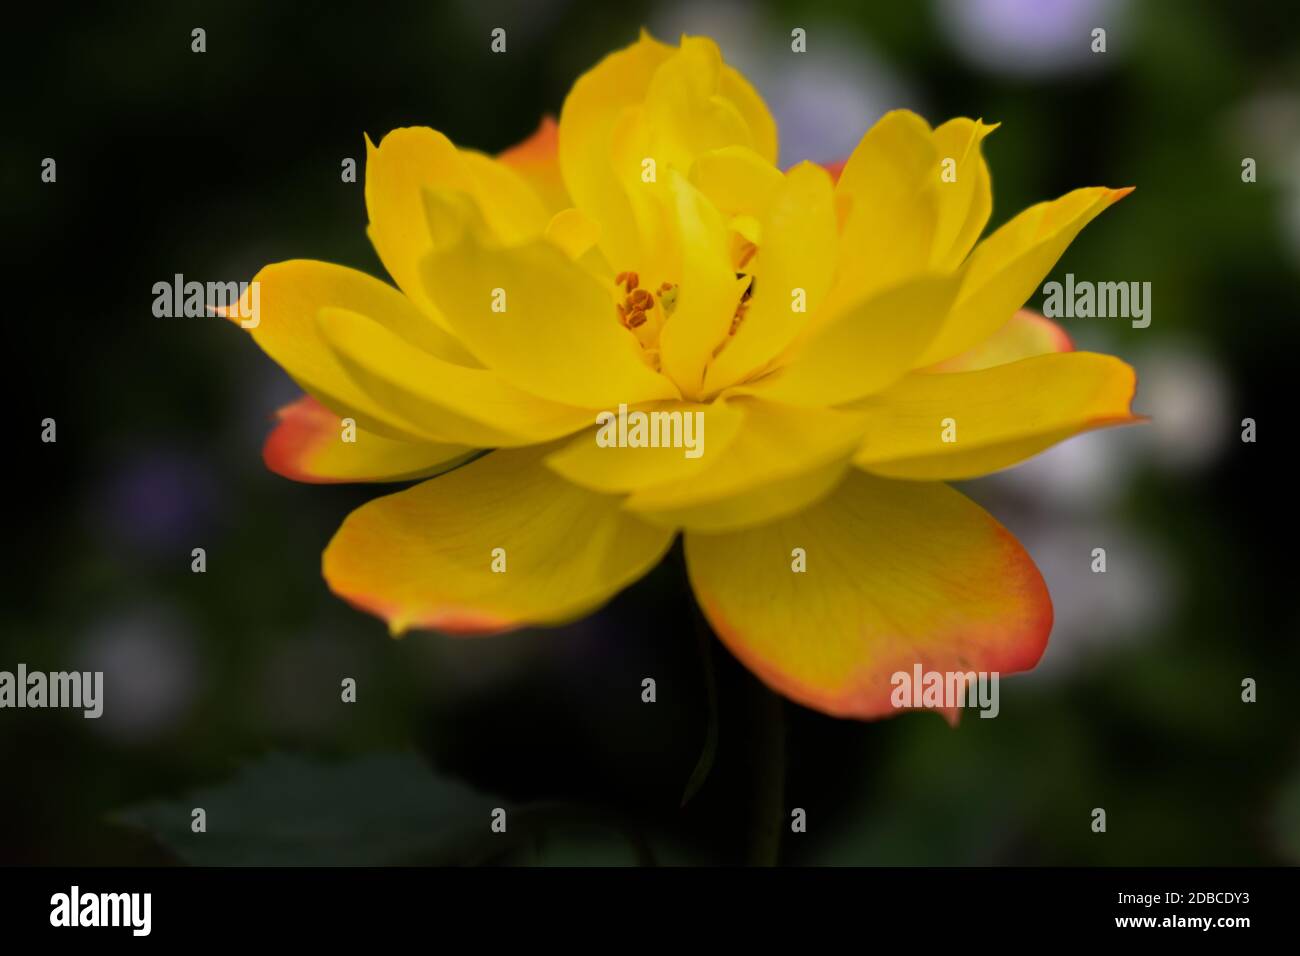 a yellow rose with orange tinged petals on a natural background. Stock Photo